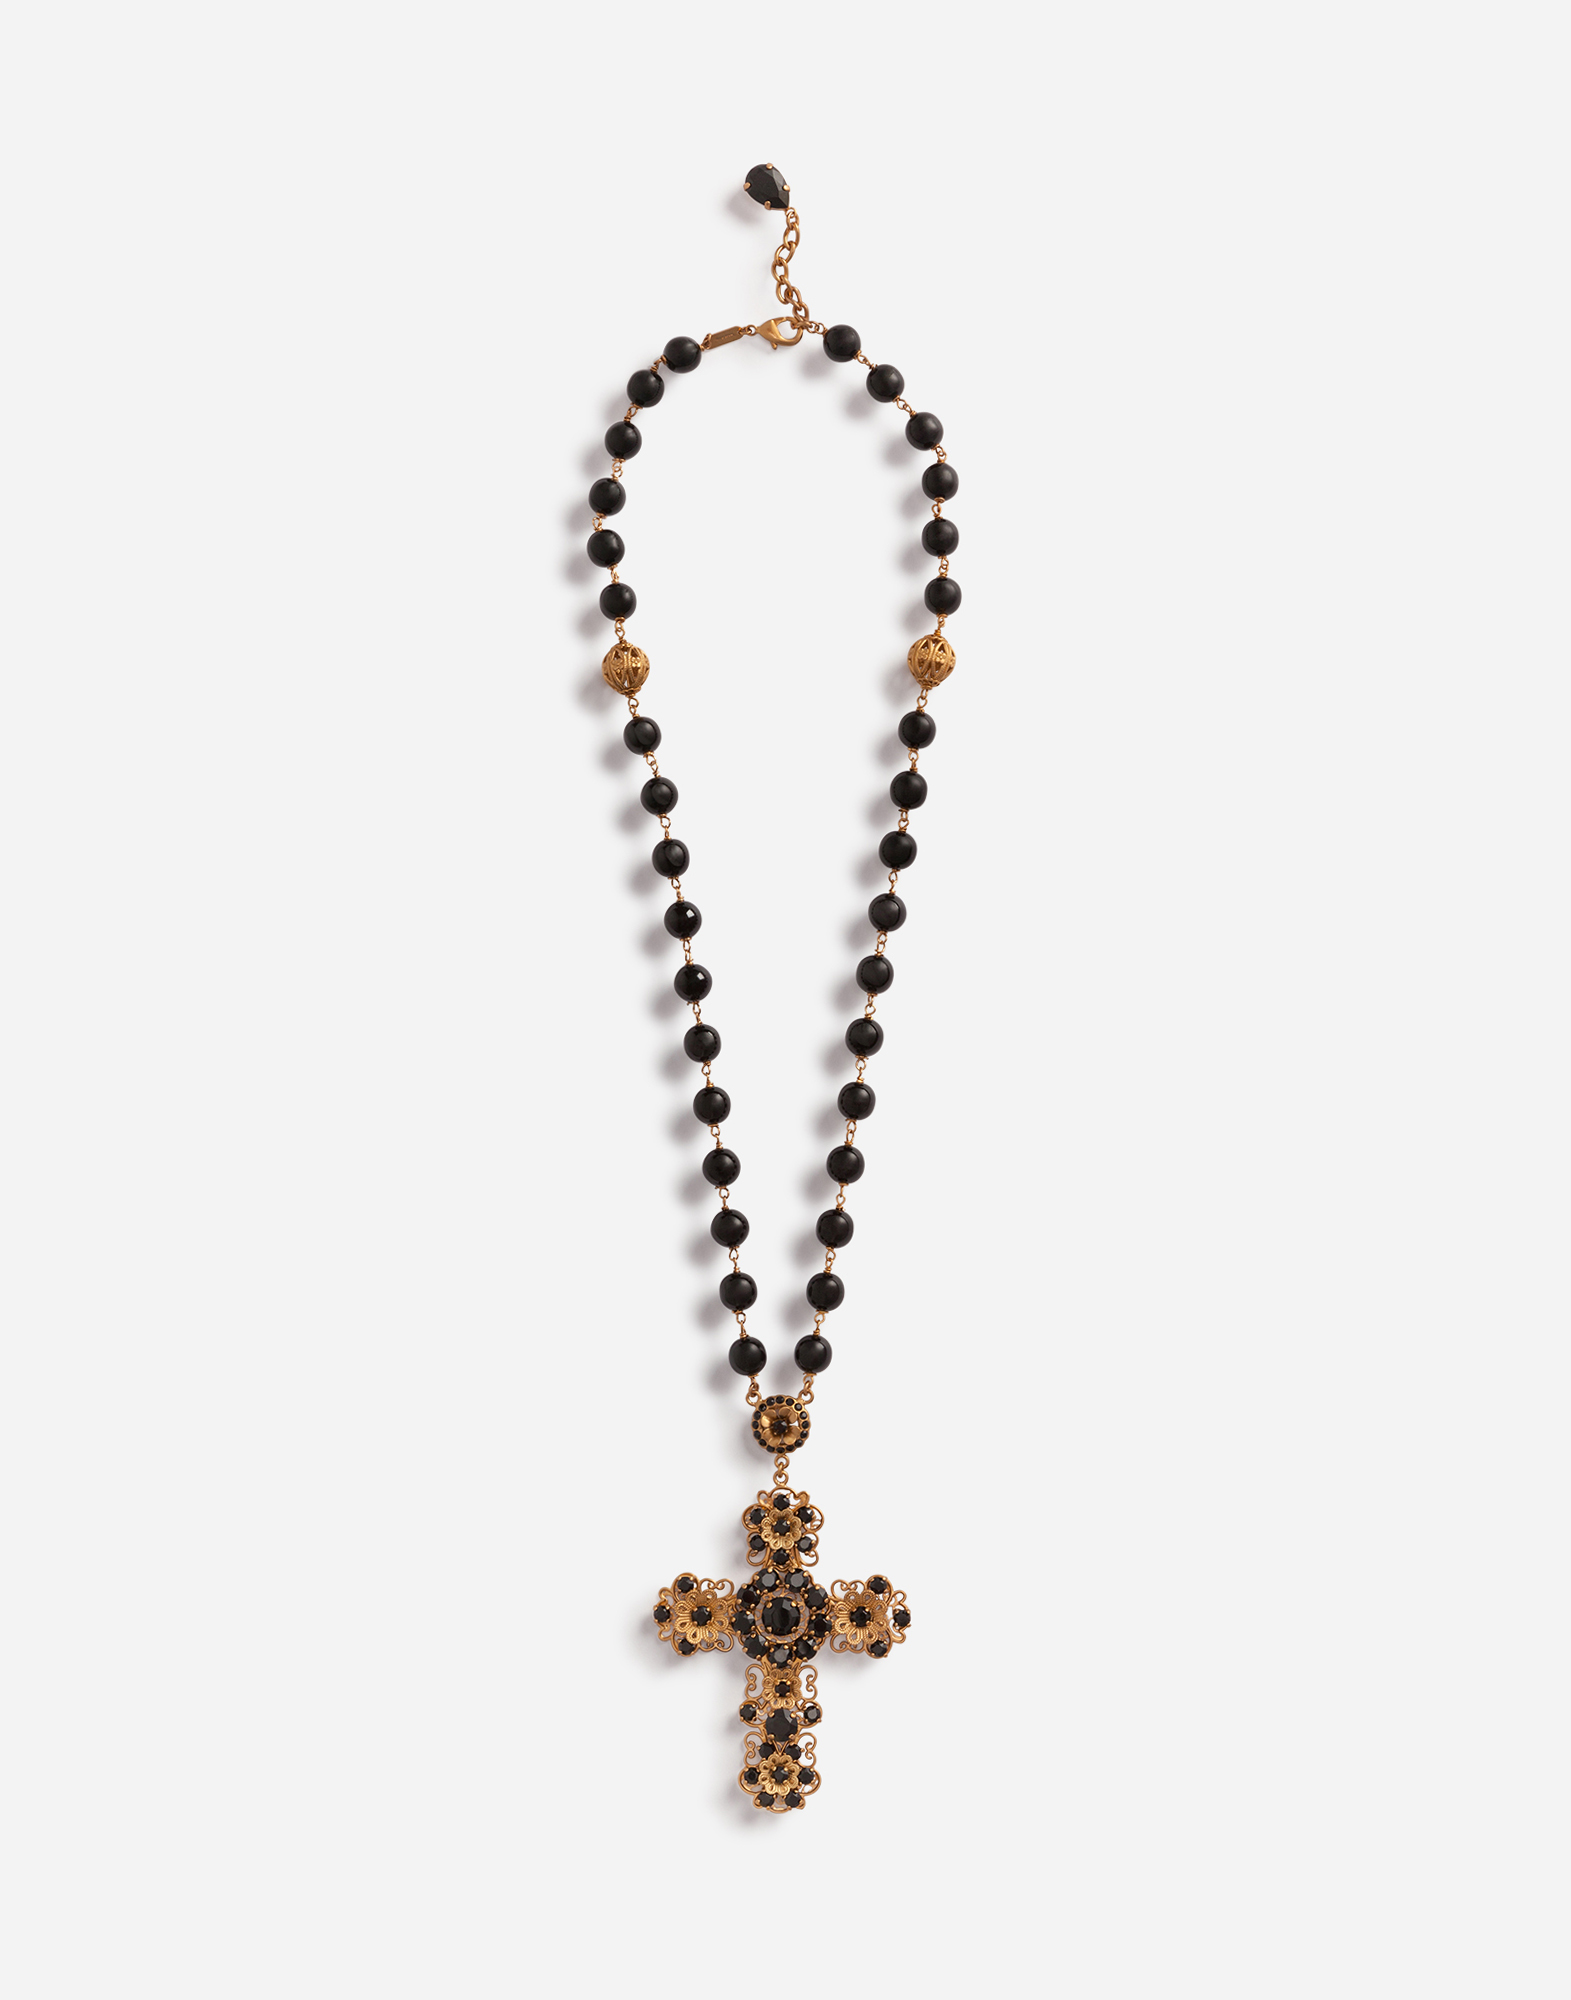 Necklace with cross pendant in Black/Gold